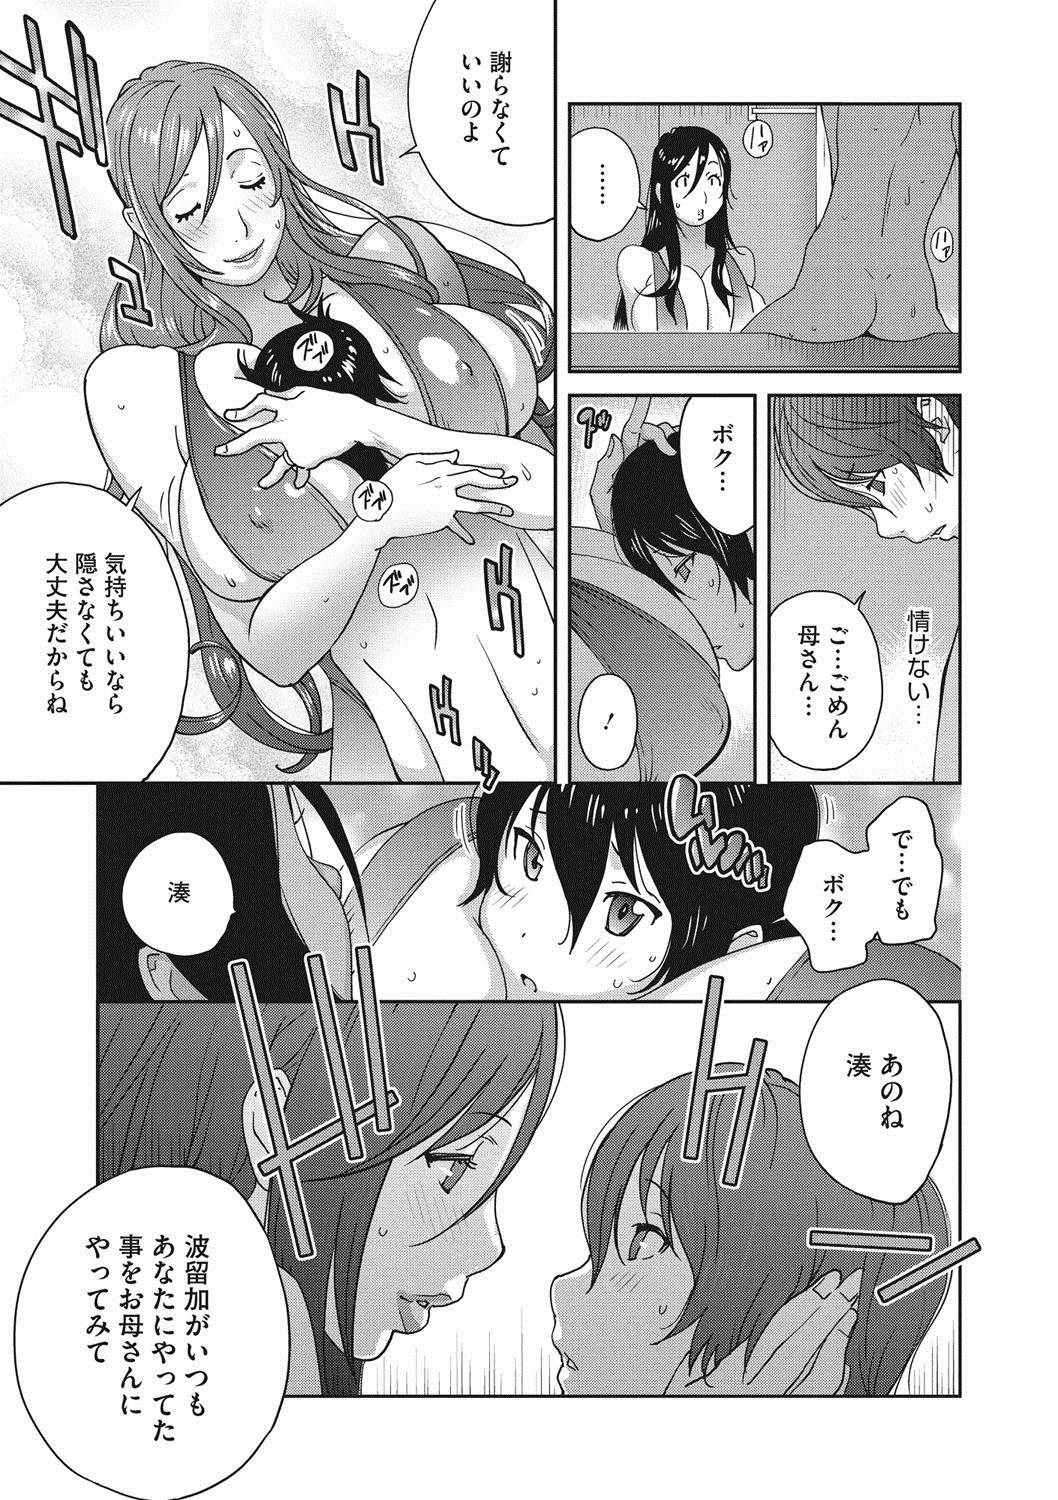 [Kotoyoshi Yumisuke] Haha to Ane to Aoi Ichigo no Fromage - Fromage of mother and an older sister and a blue strawberry Ch. 1-4 28